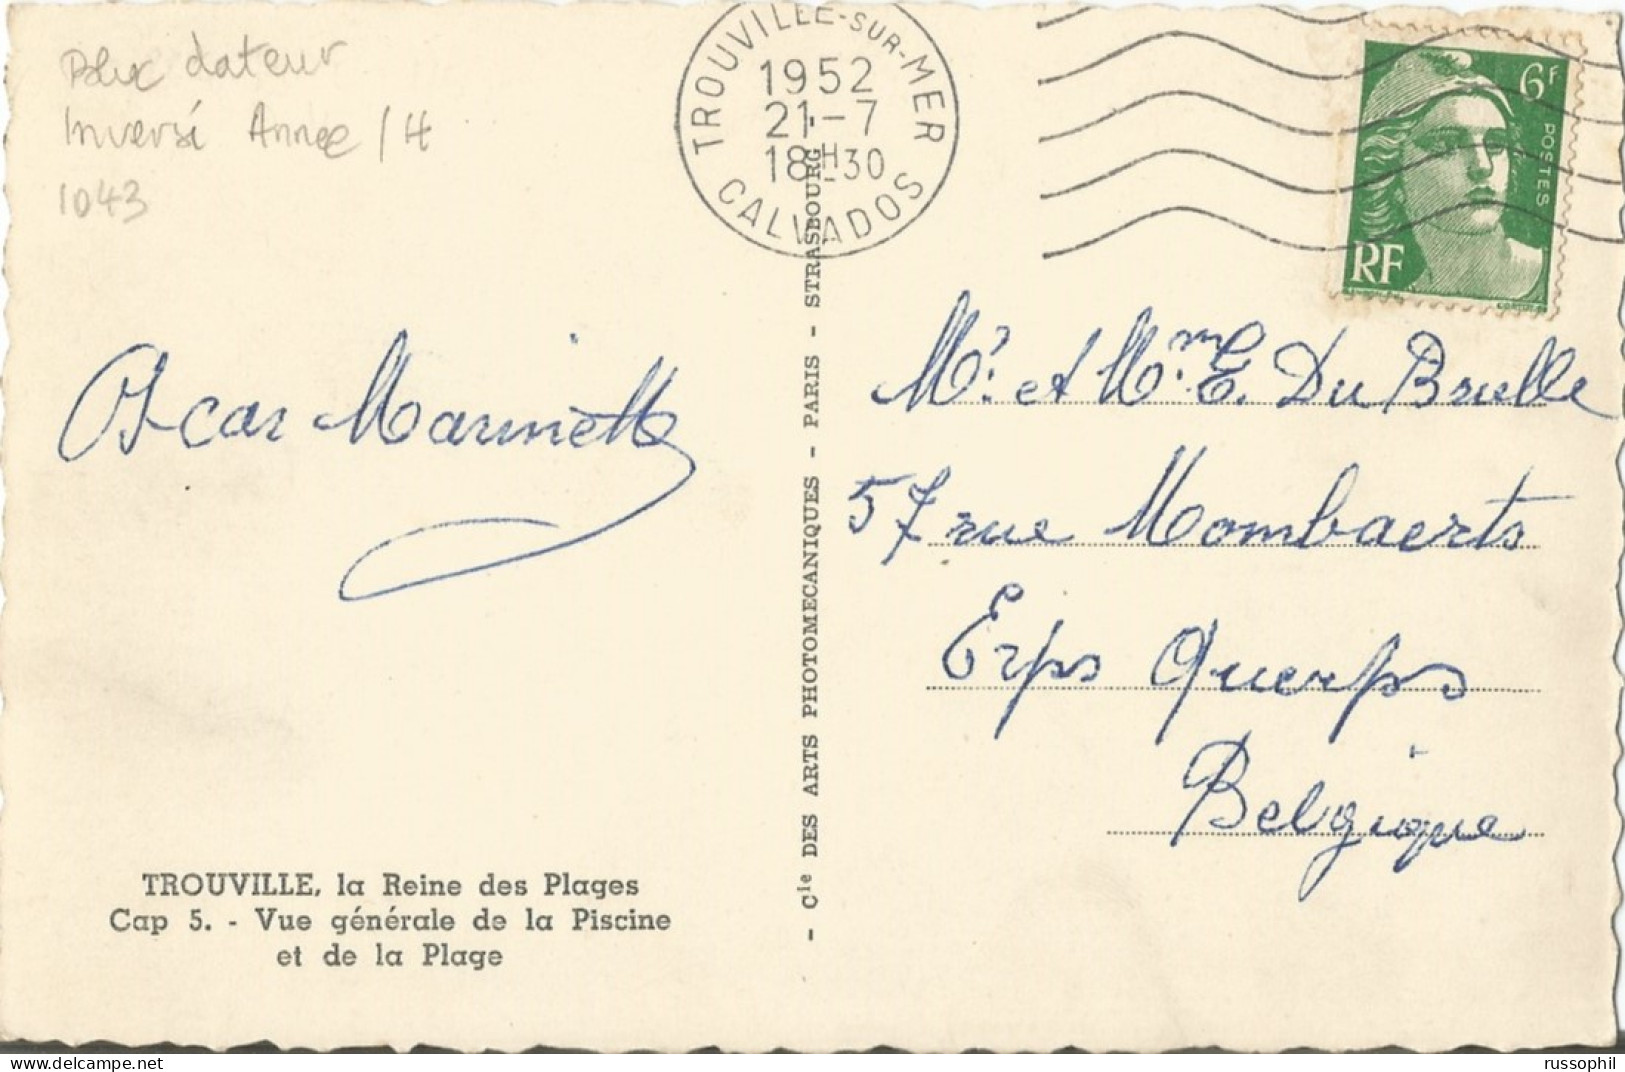 FRANCE -  VARIETY & CURIOSITY - 14 - WRONG ORDER YEAR /DAY- MONTH/ HOUR IN DATE BLOCK OF MUTE SECAP  "TROUVILLE"- 1952 - Briefe U. Dokumente